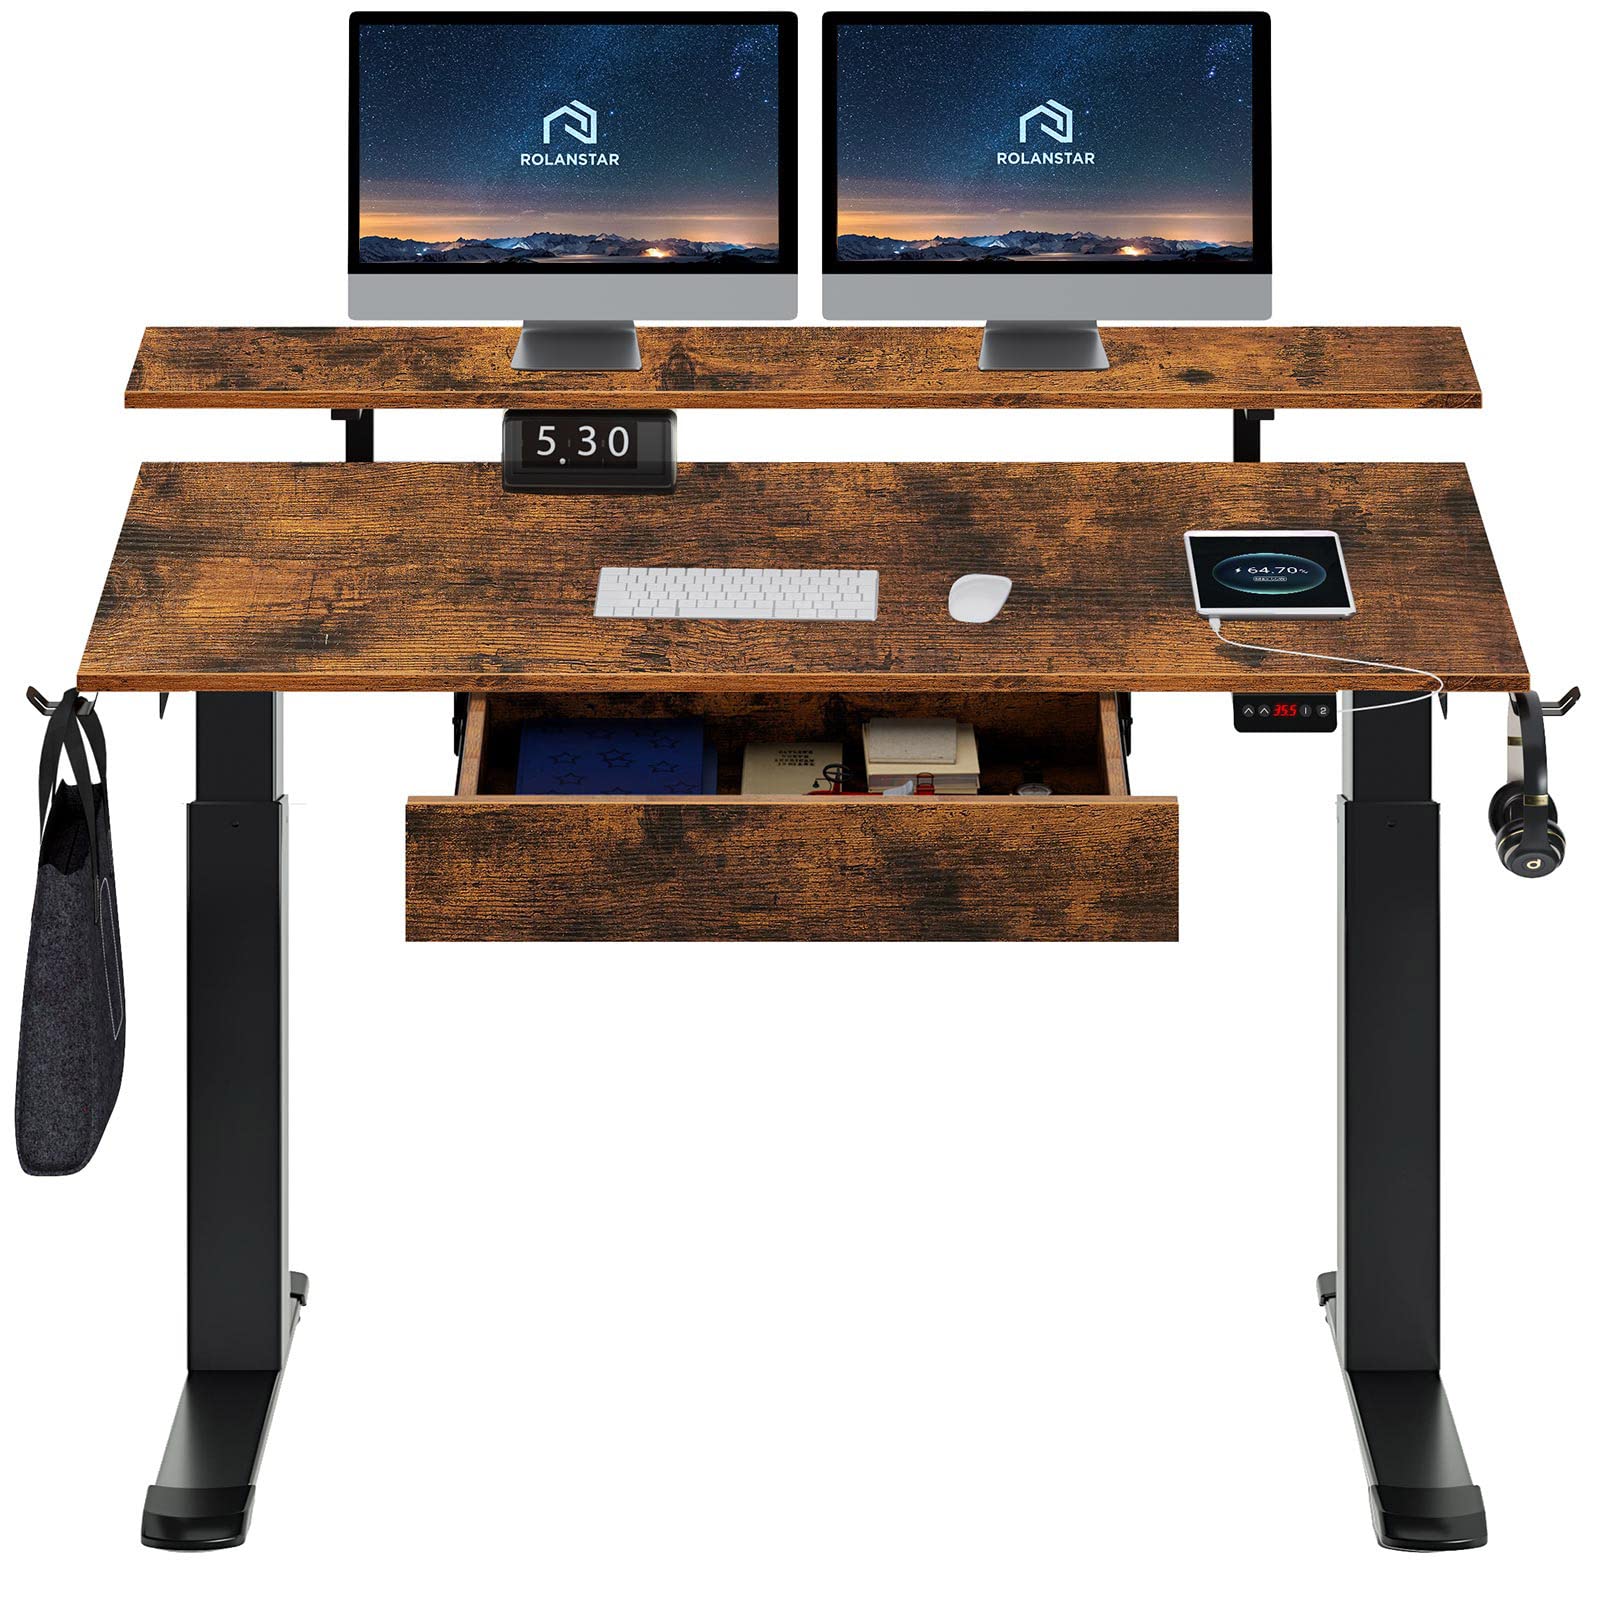 Rolanstar Standing Desk Dual Motor with USB Charging Ports, 47" Adjustable Height Desk with Drawer and Monitor Shelf, Electric Standing Desk wi...